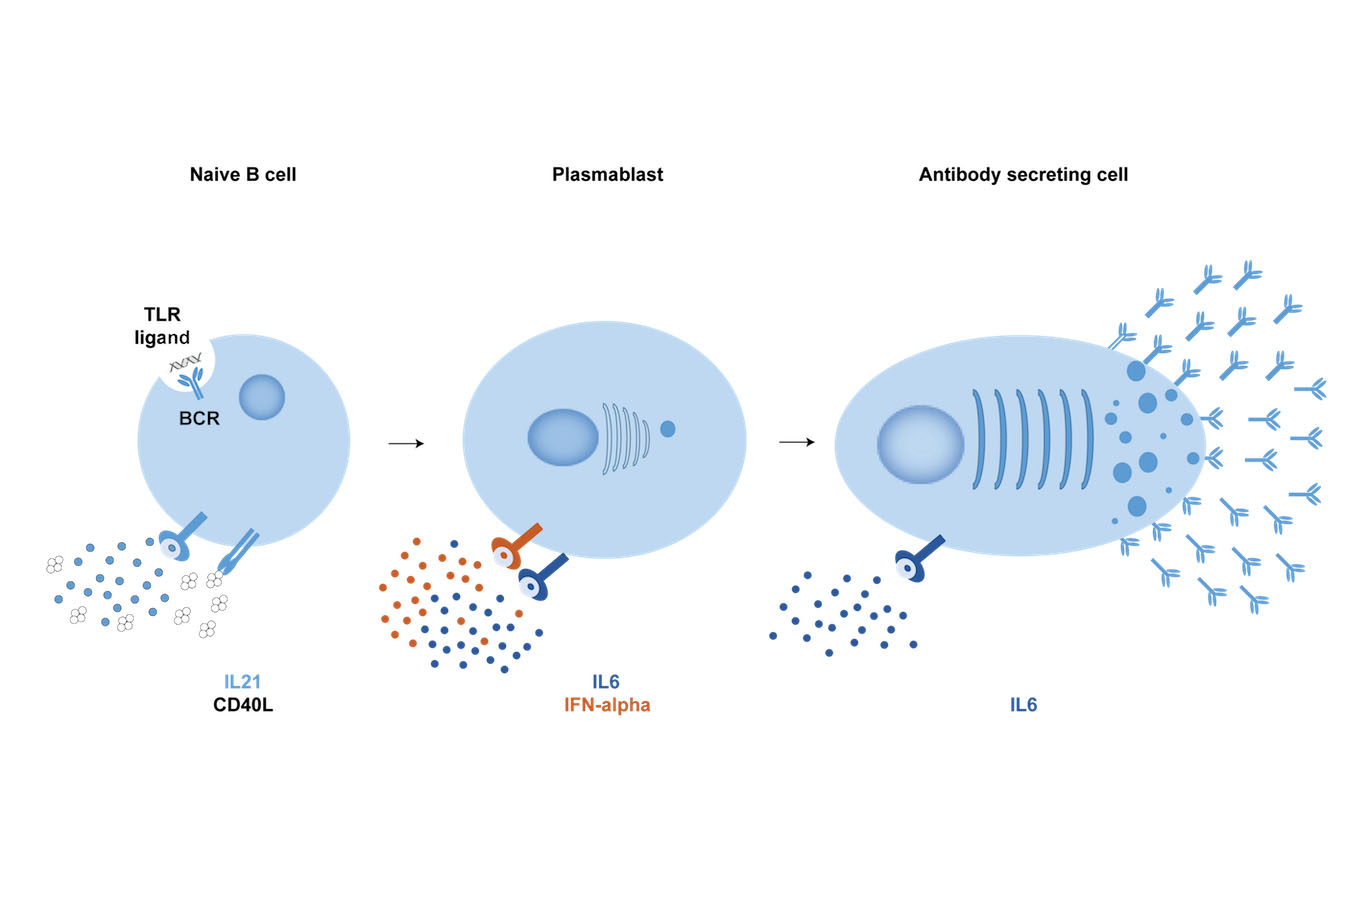 Graphic showing Naive B cell, Plasmablast, and Antibody secreting cell